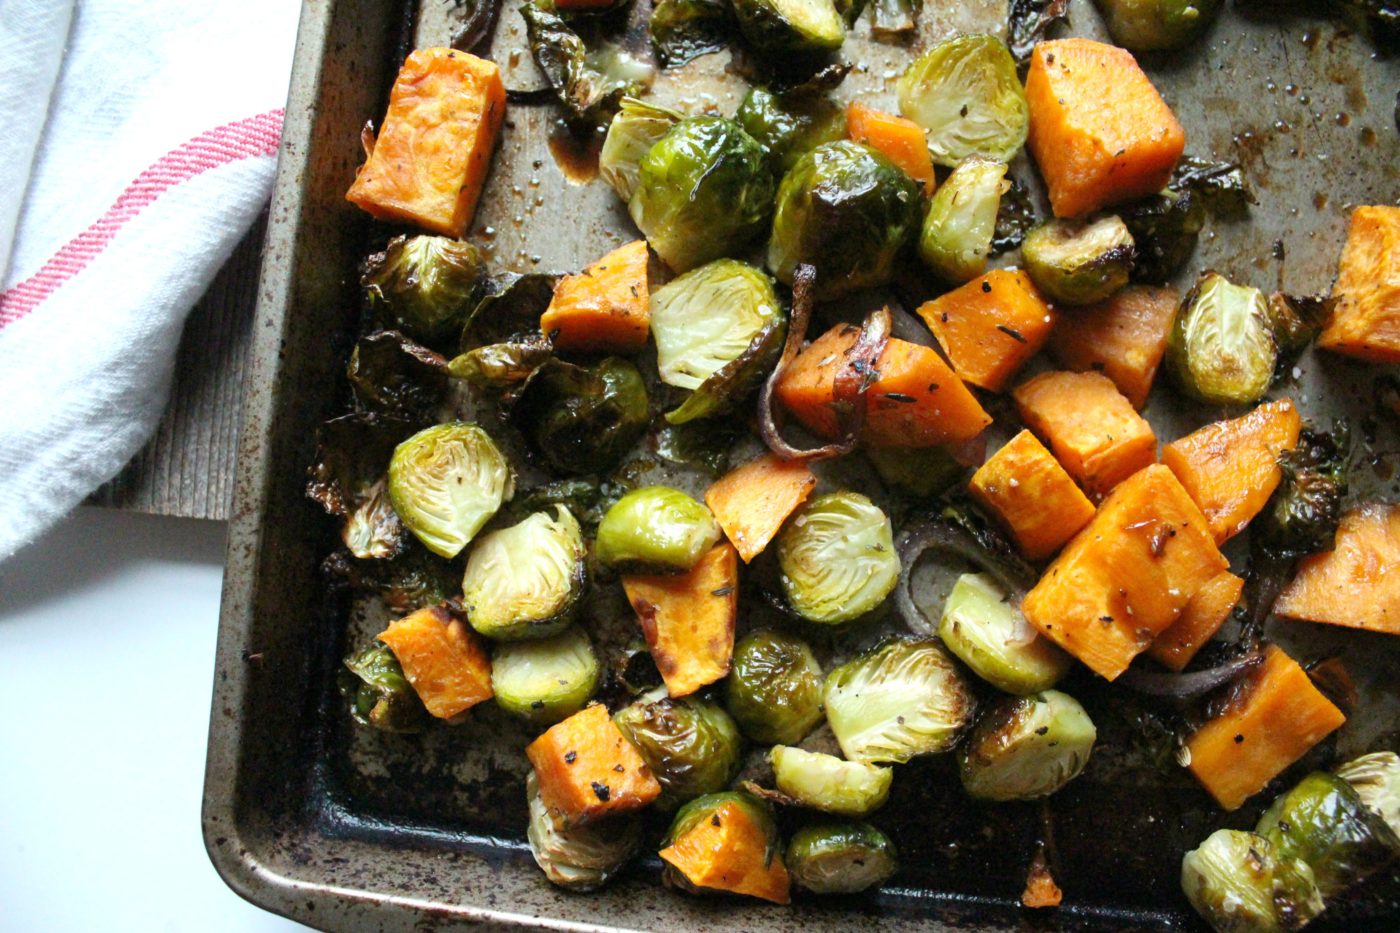 Maple roasted Brussels sprouts are the best side dish to compliment any meal.